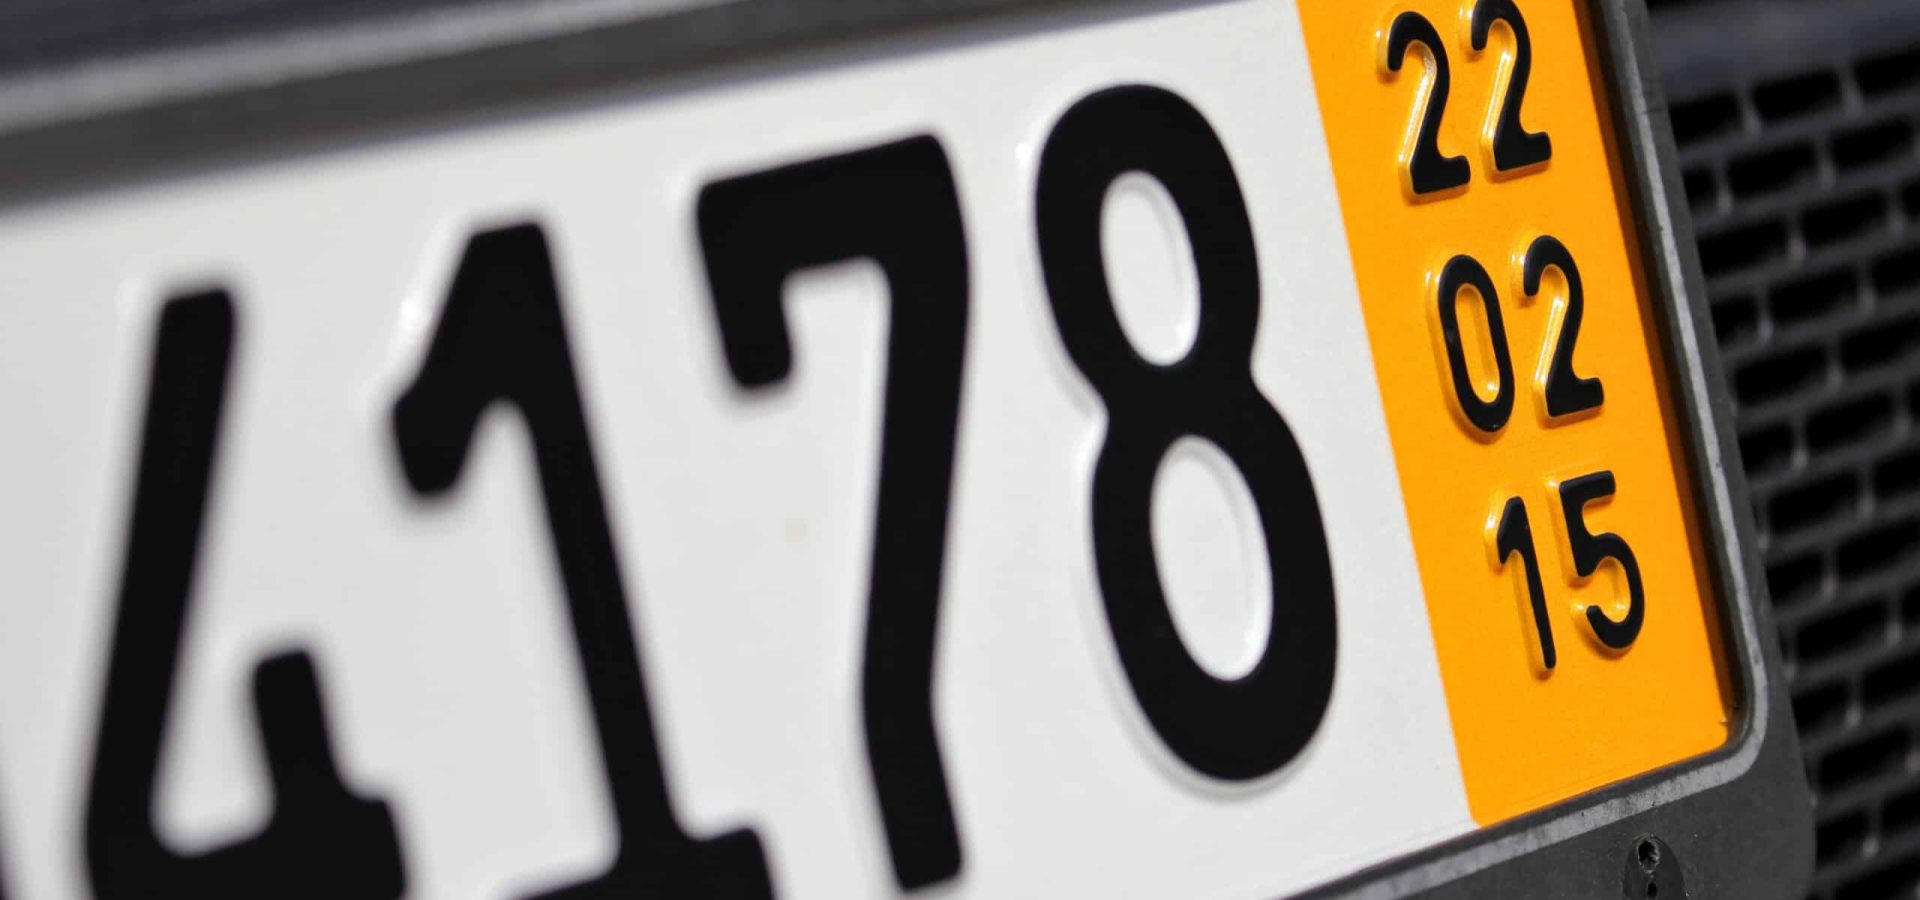 validation date of a special temporary plate for vehicles in Germany